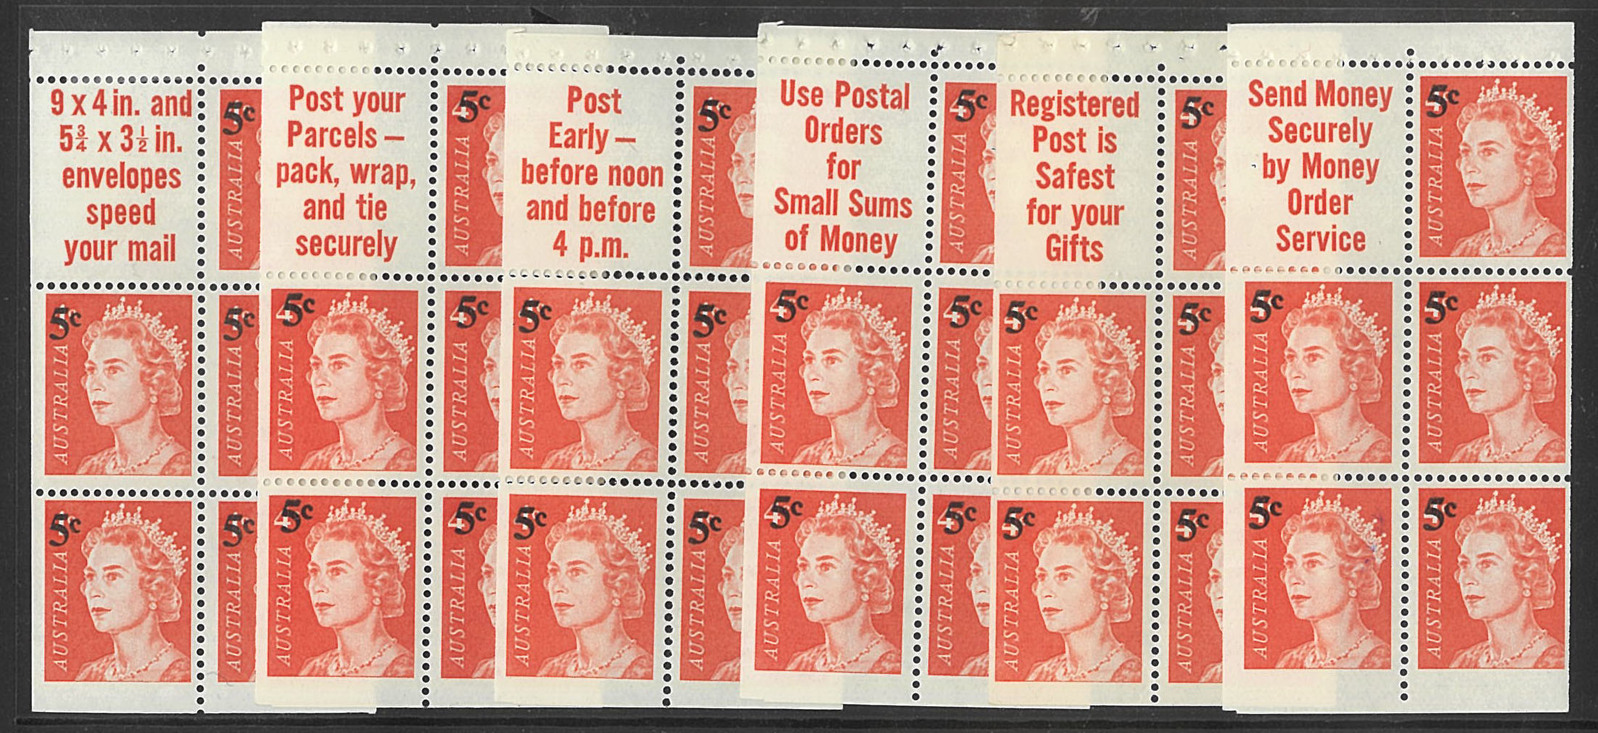 Stamp Dealers in Adelaide